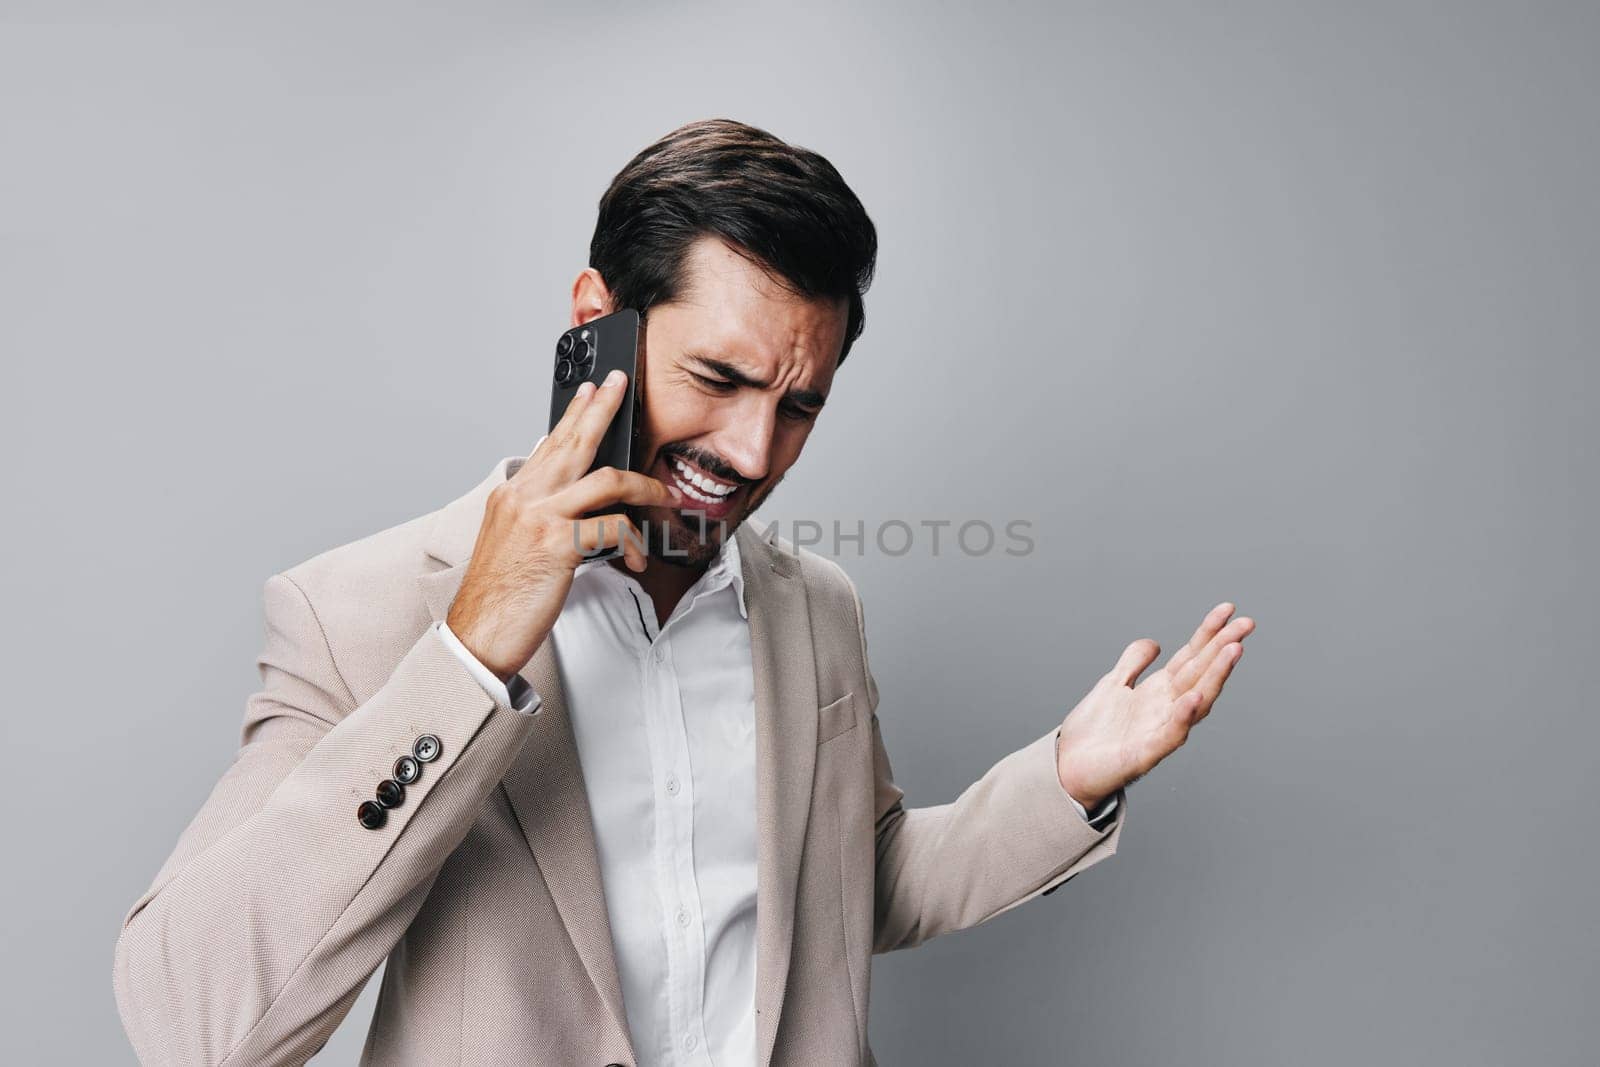 hold man angry smartphone phone connection smile portrait suit business call by SHOTPRIME